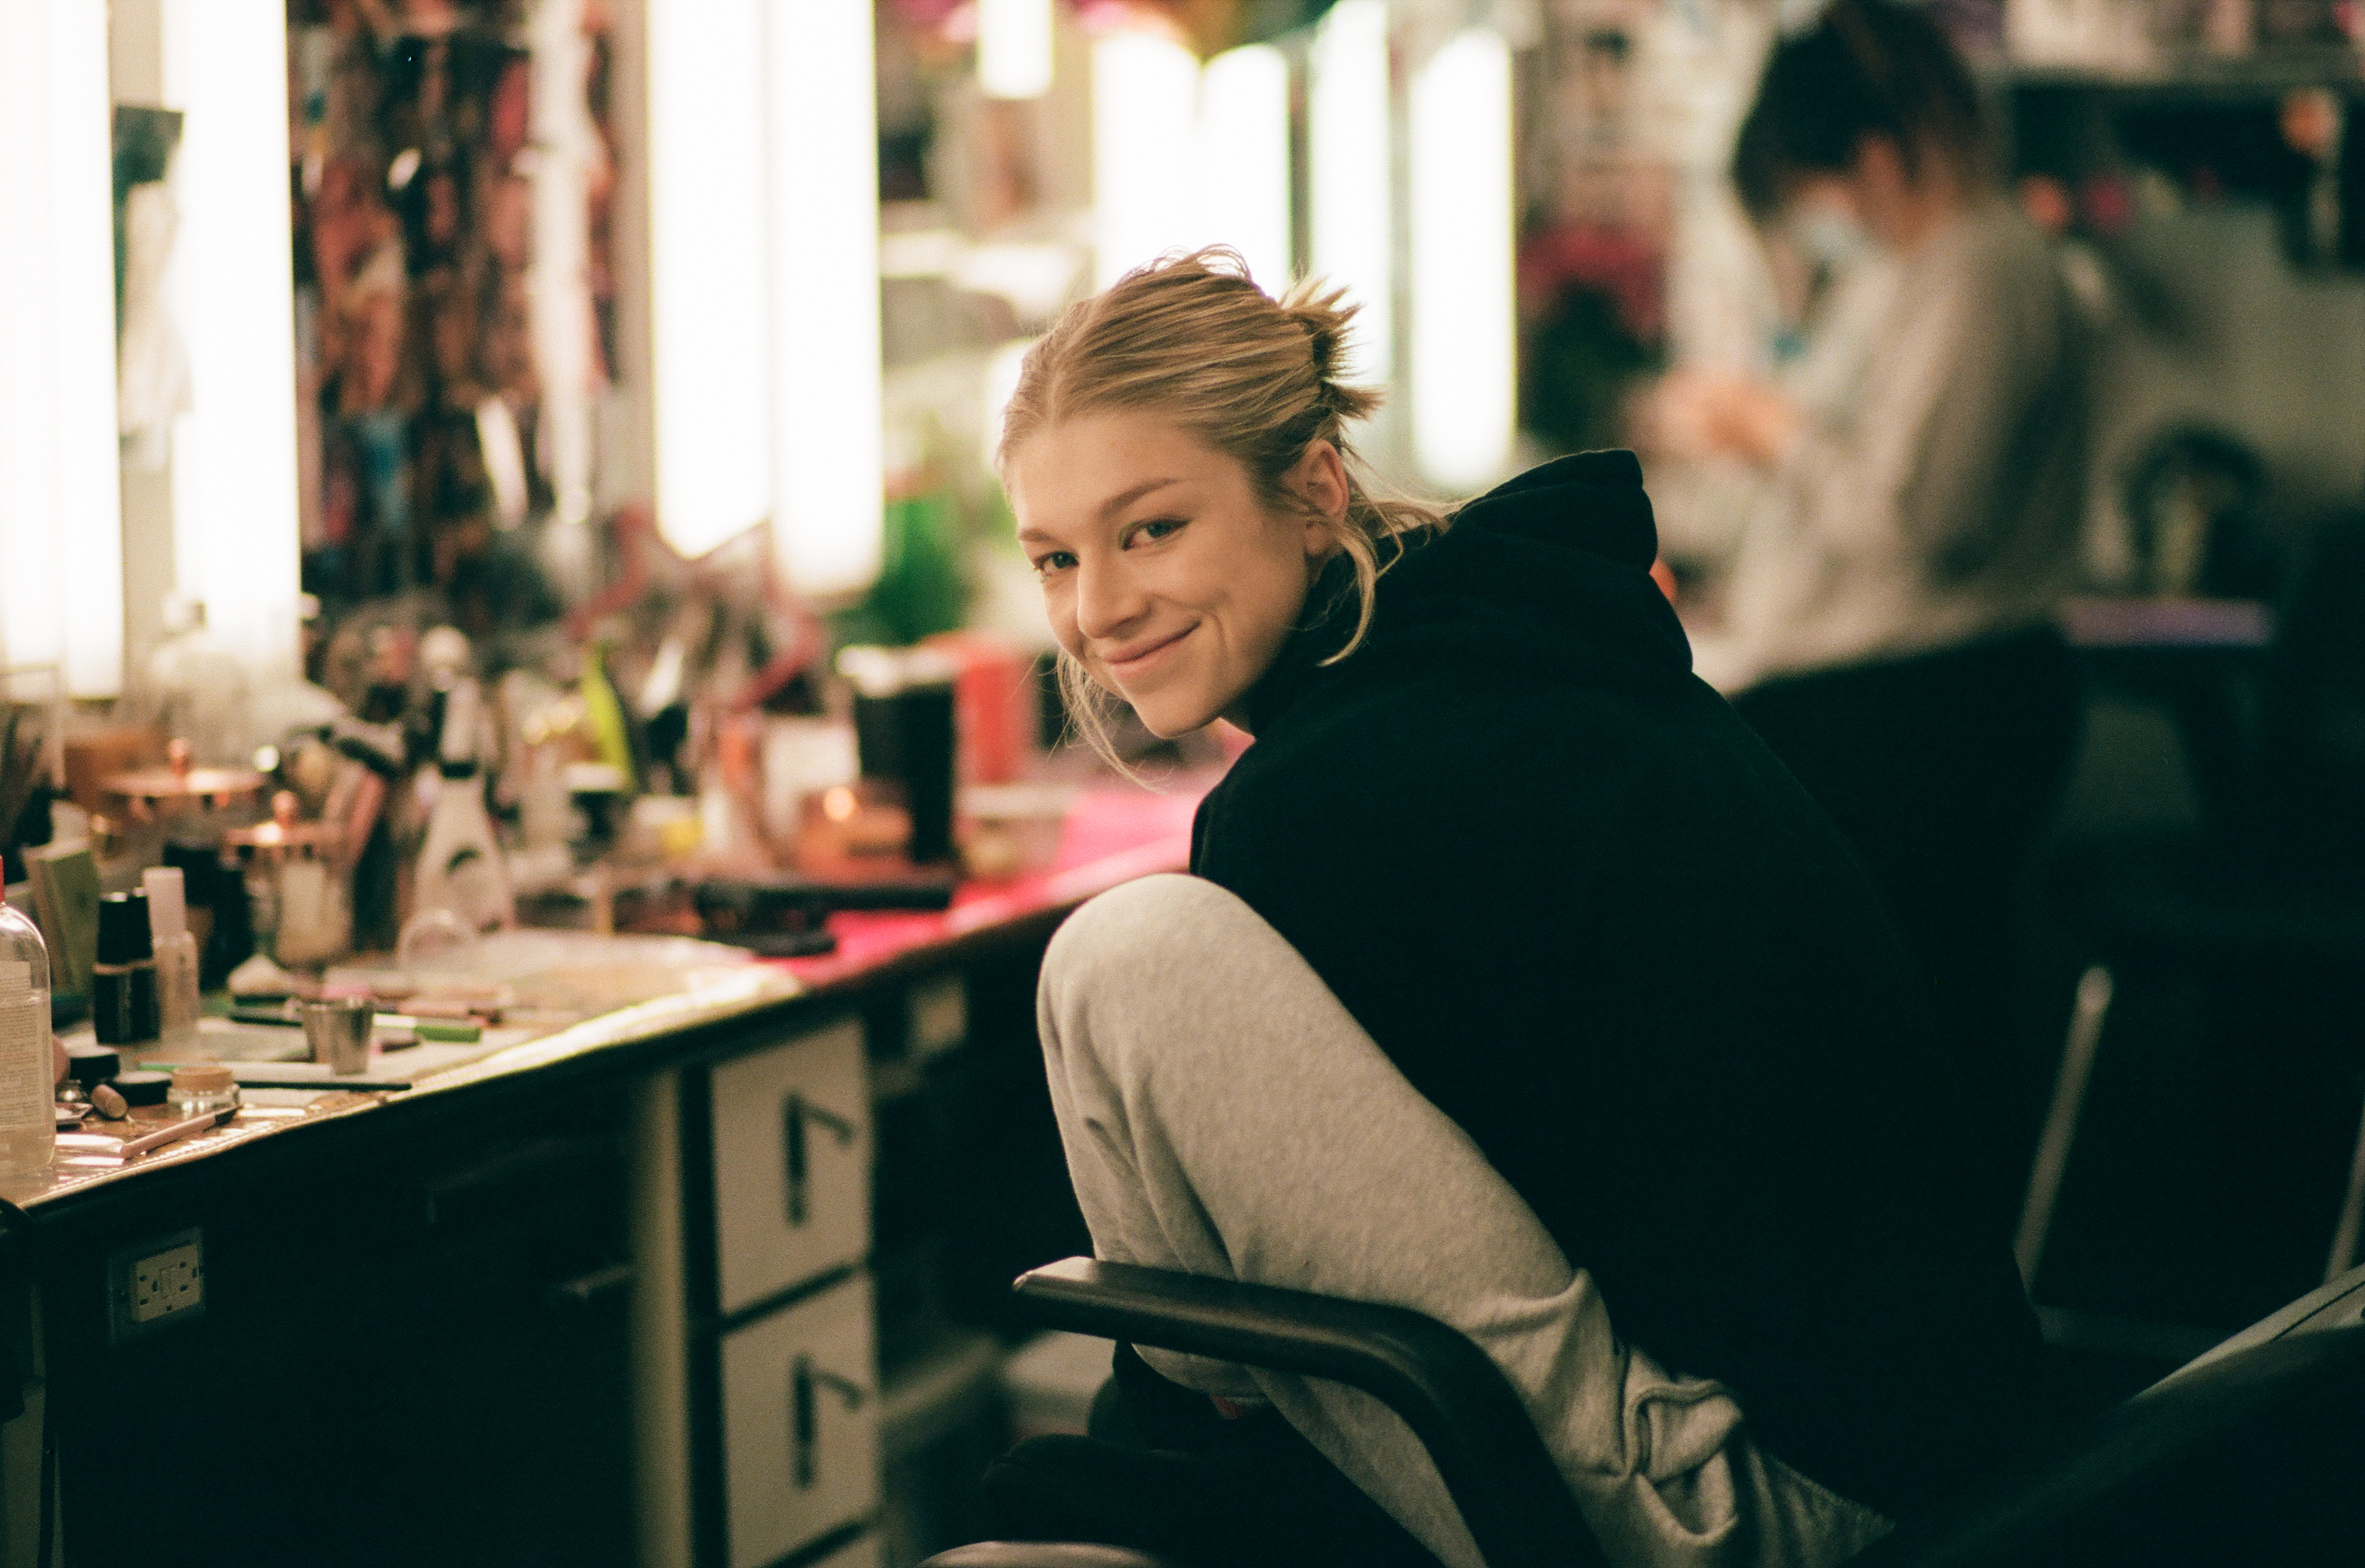 Hunter Schafer smiles while in the dressing chair